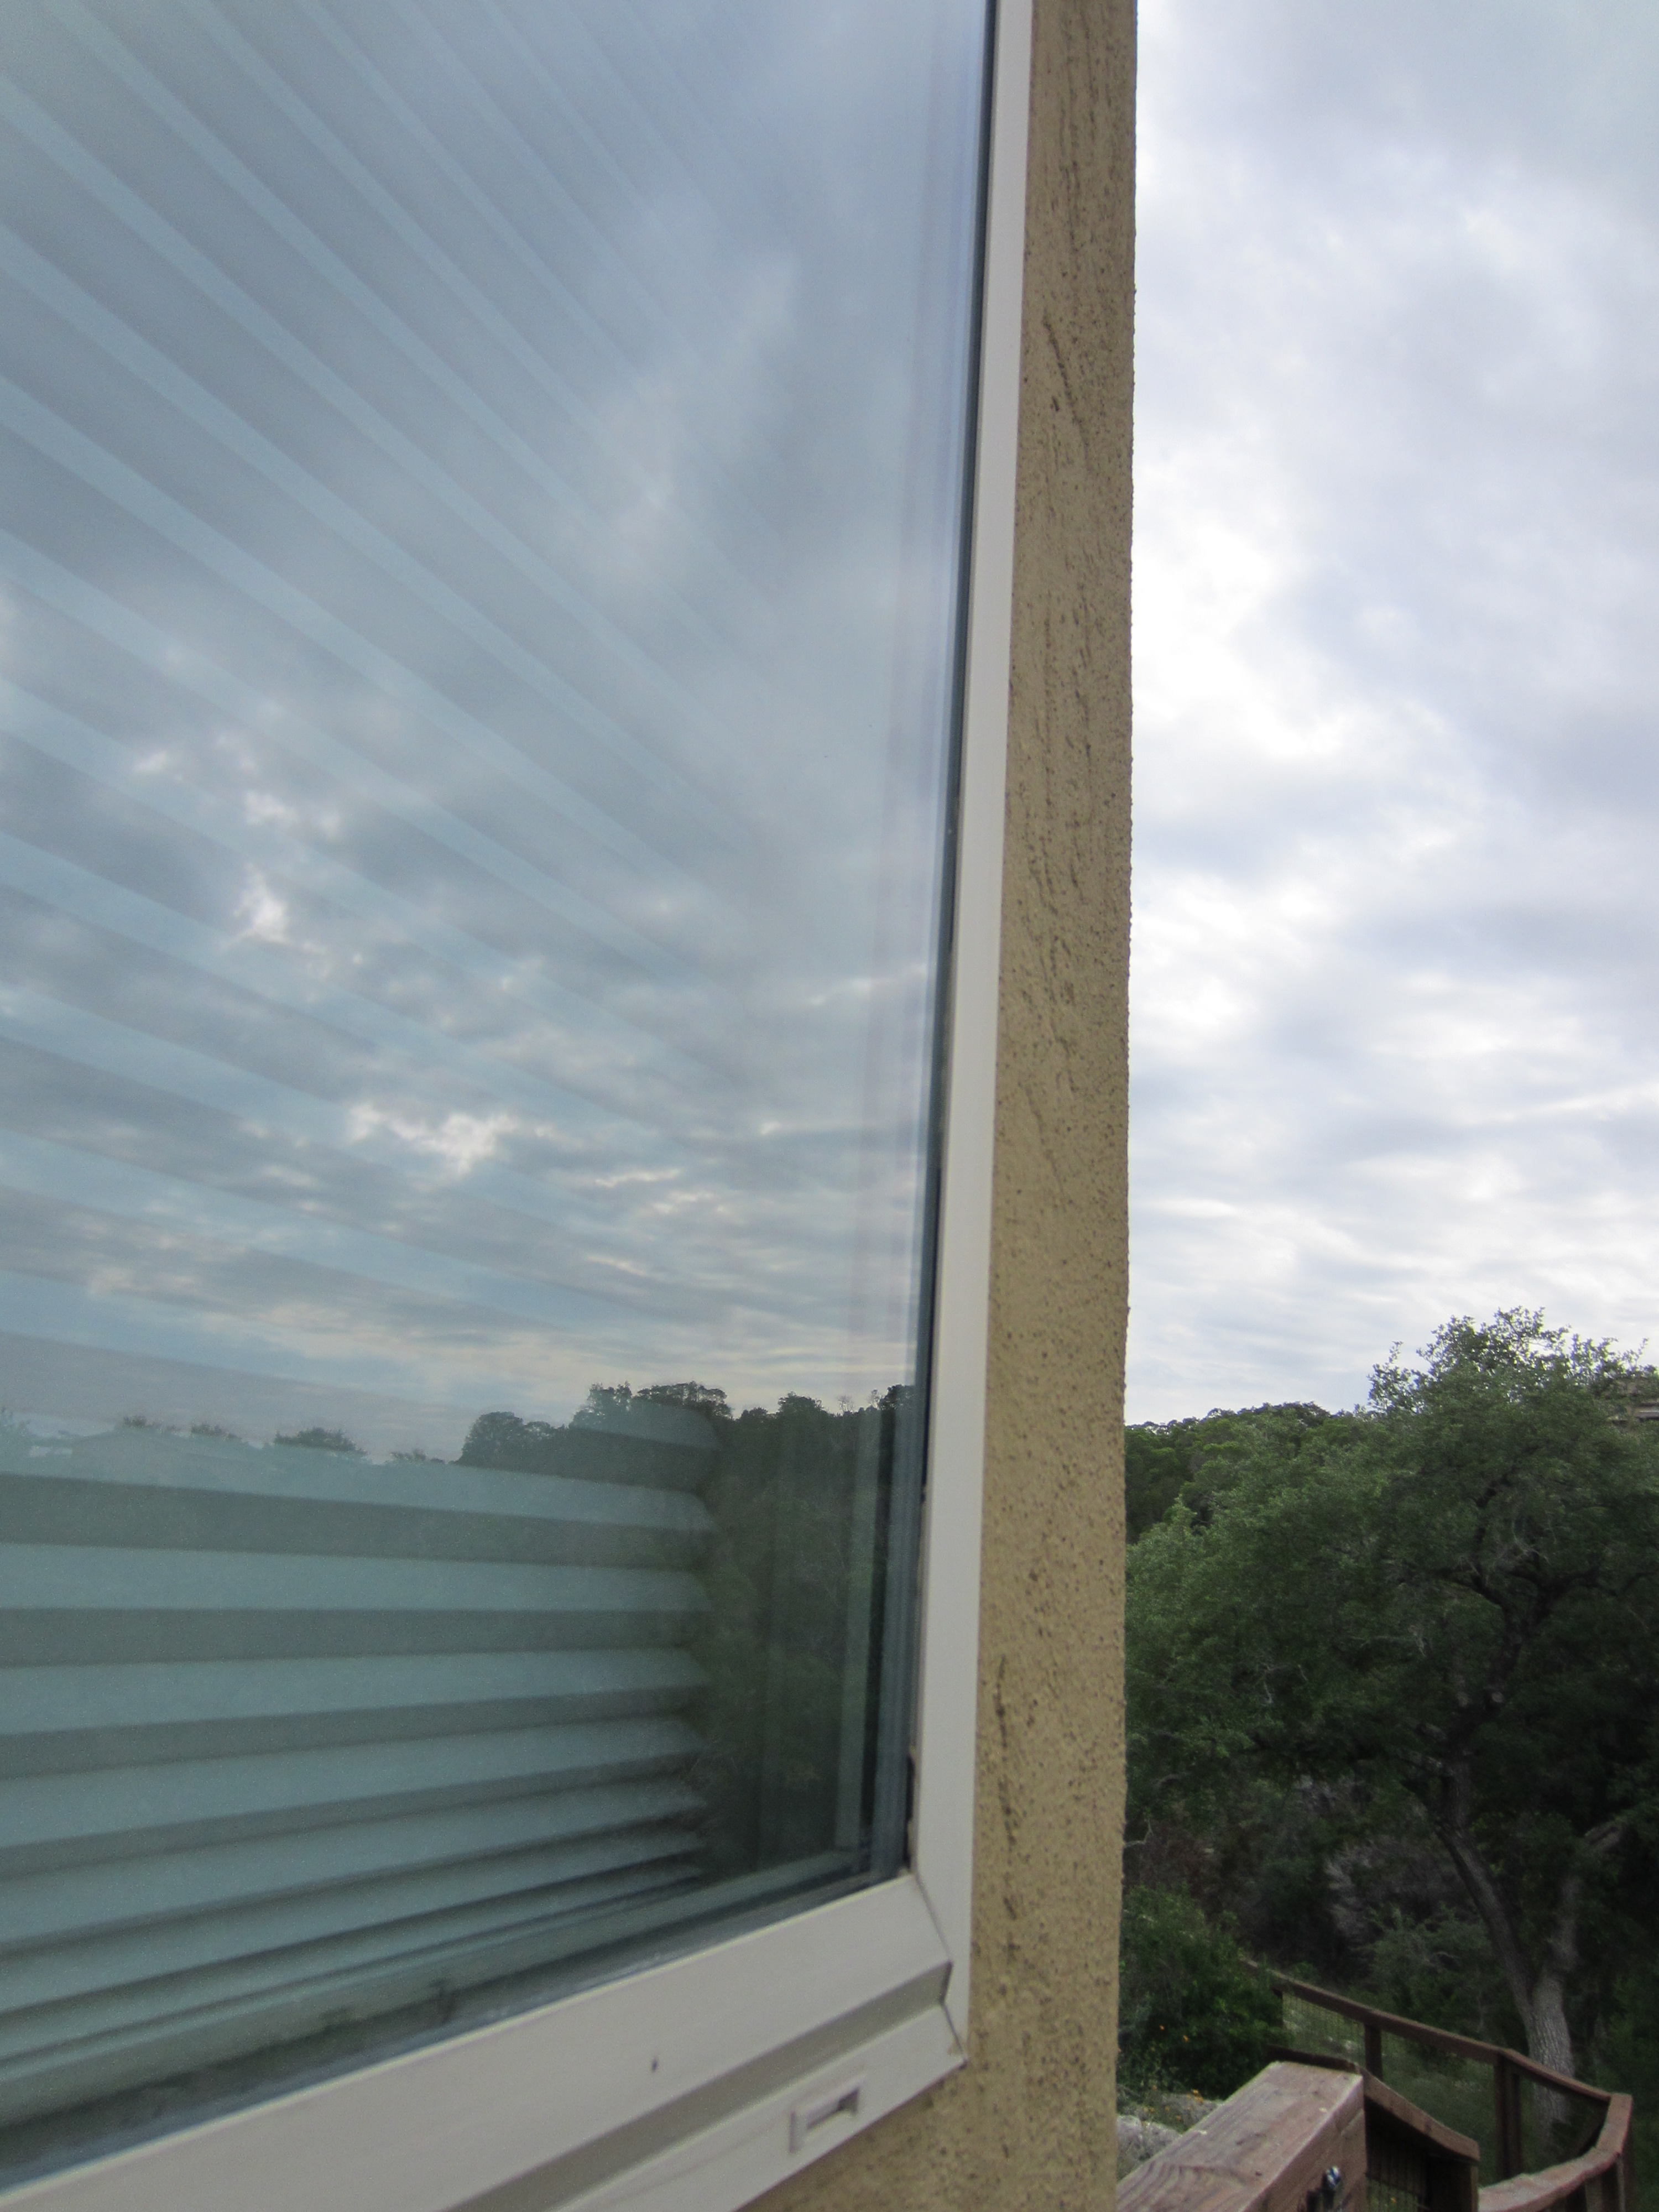 Vinyl Window Solar Screen Installation About Us, About Our Solar Screens of Austin TX